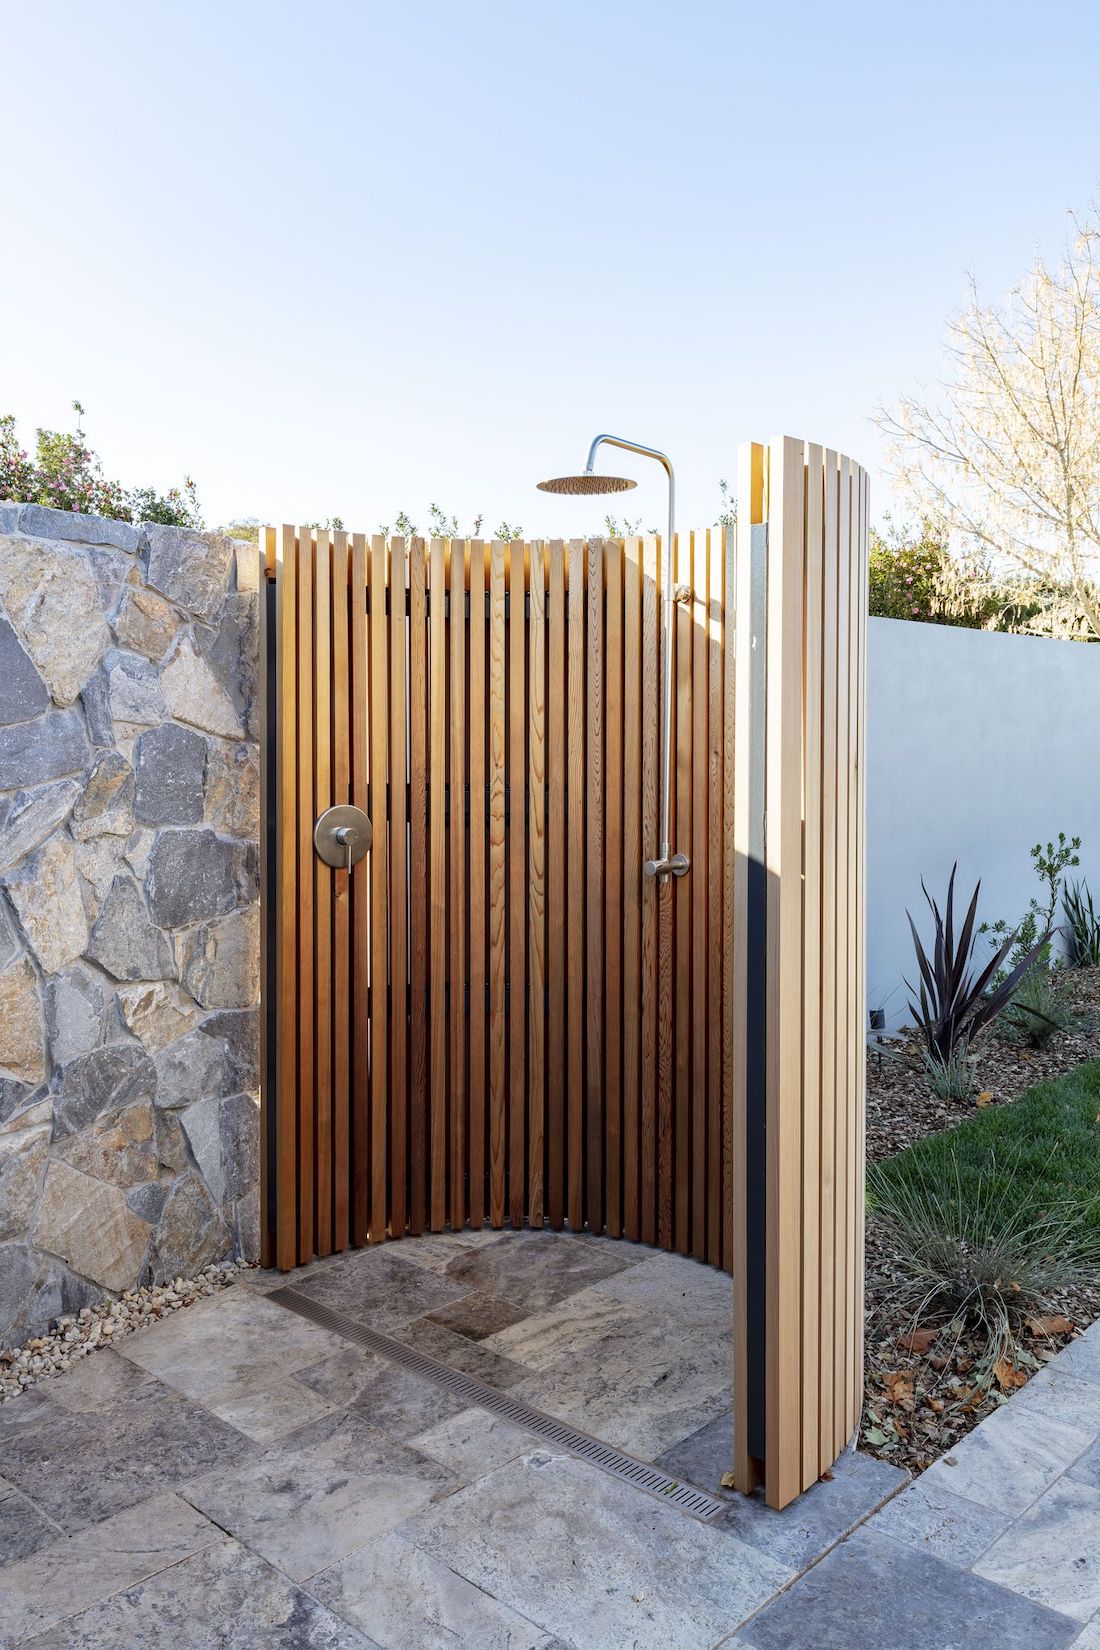 Curved timber wall with outdoor shower inspiration